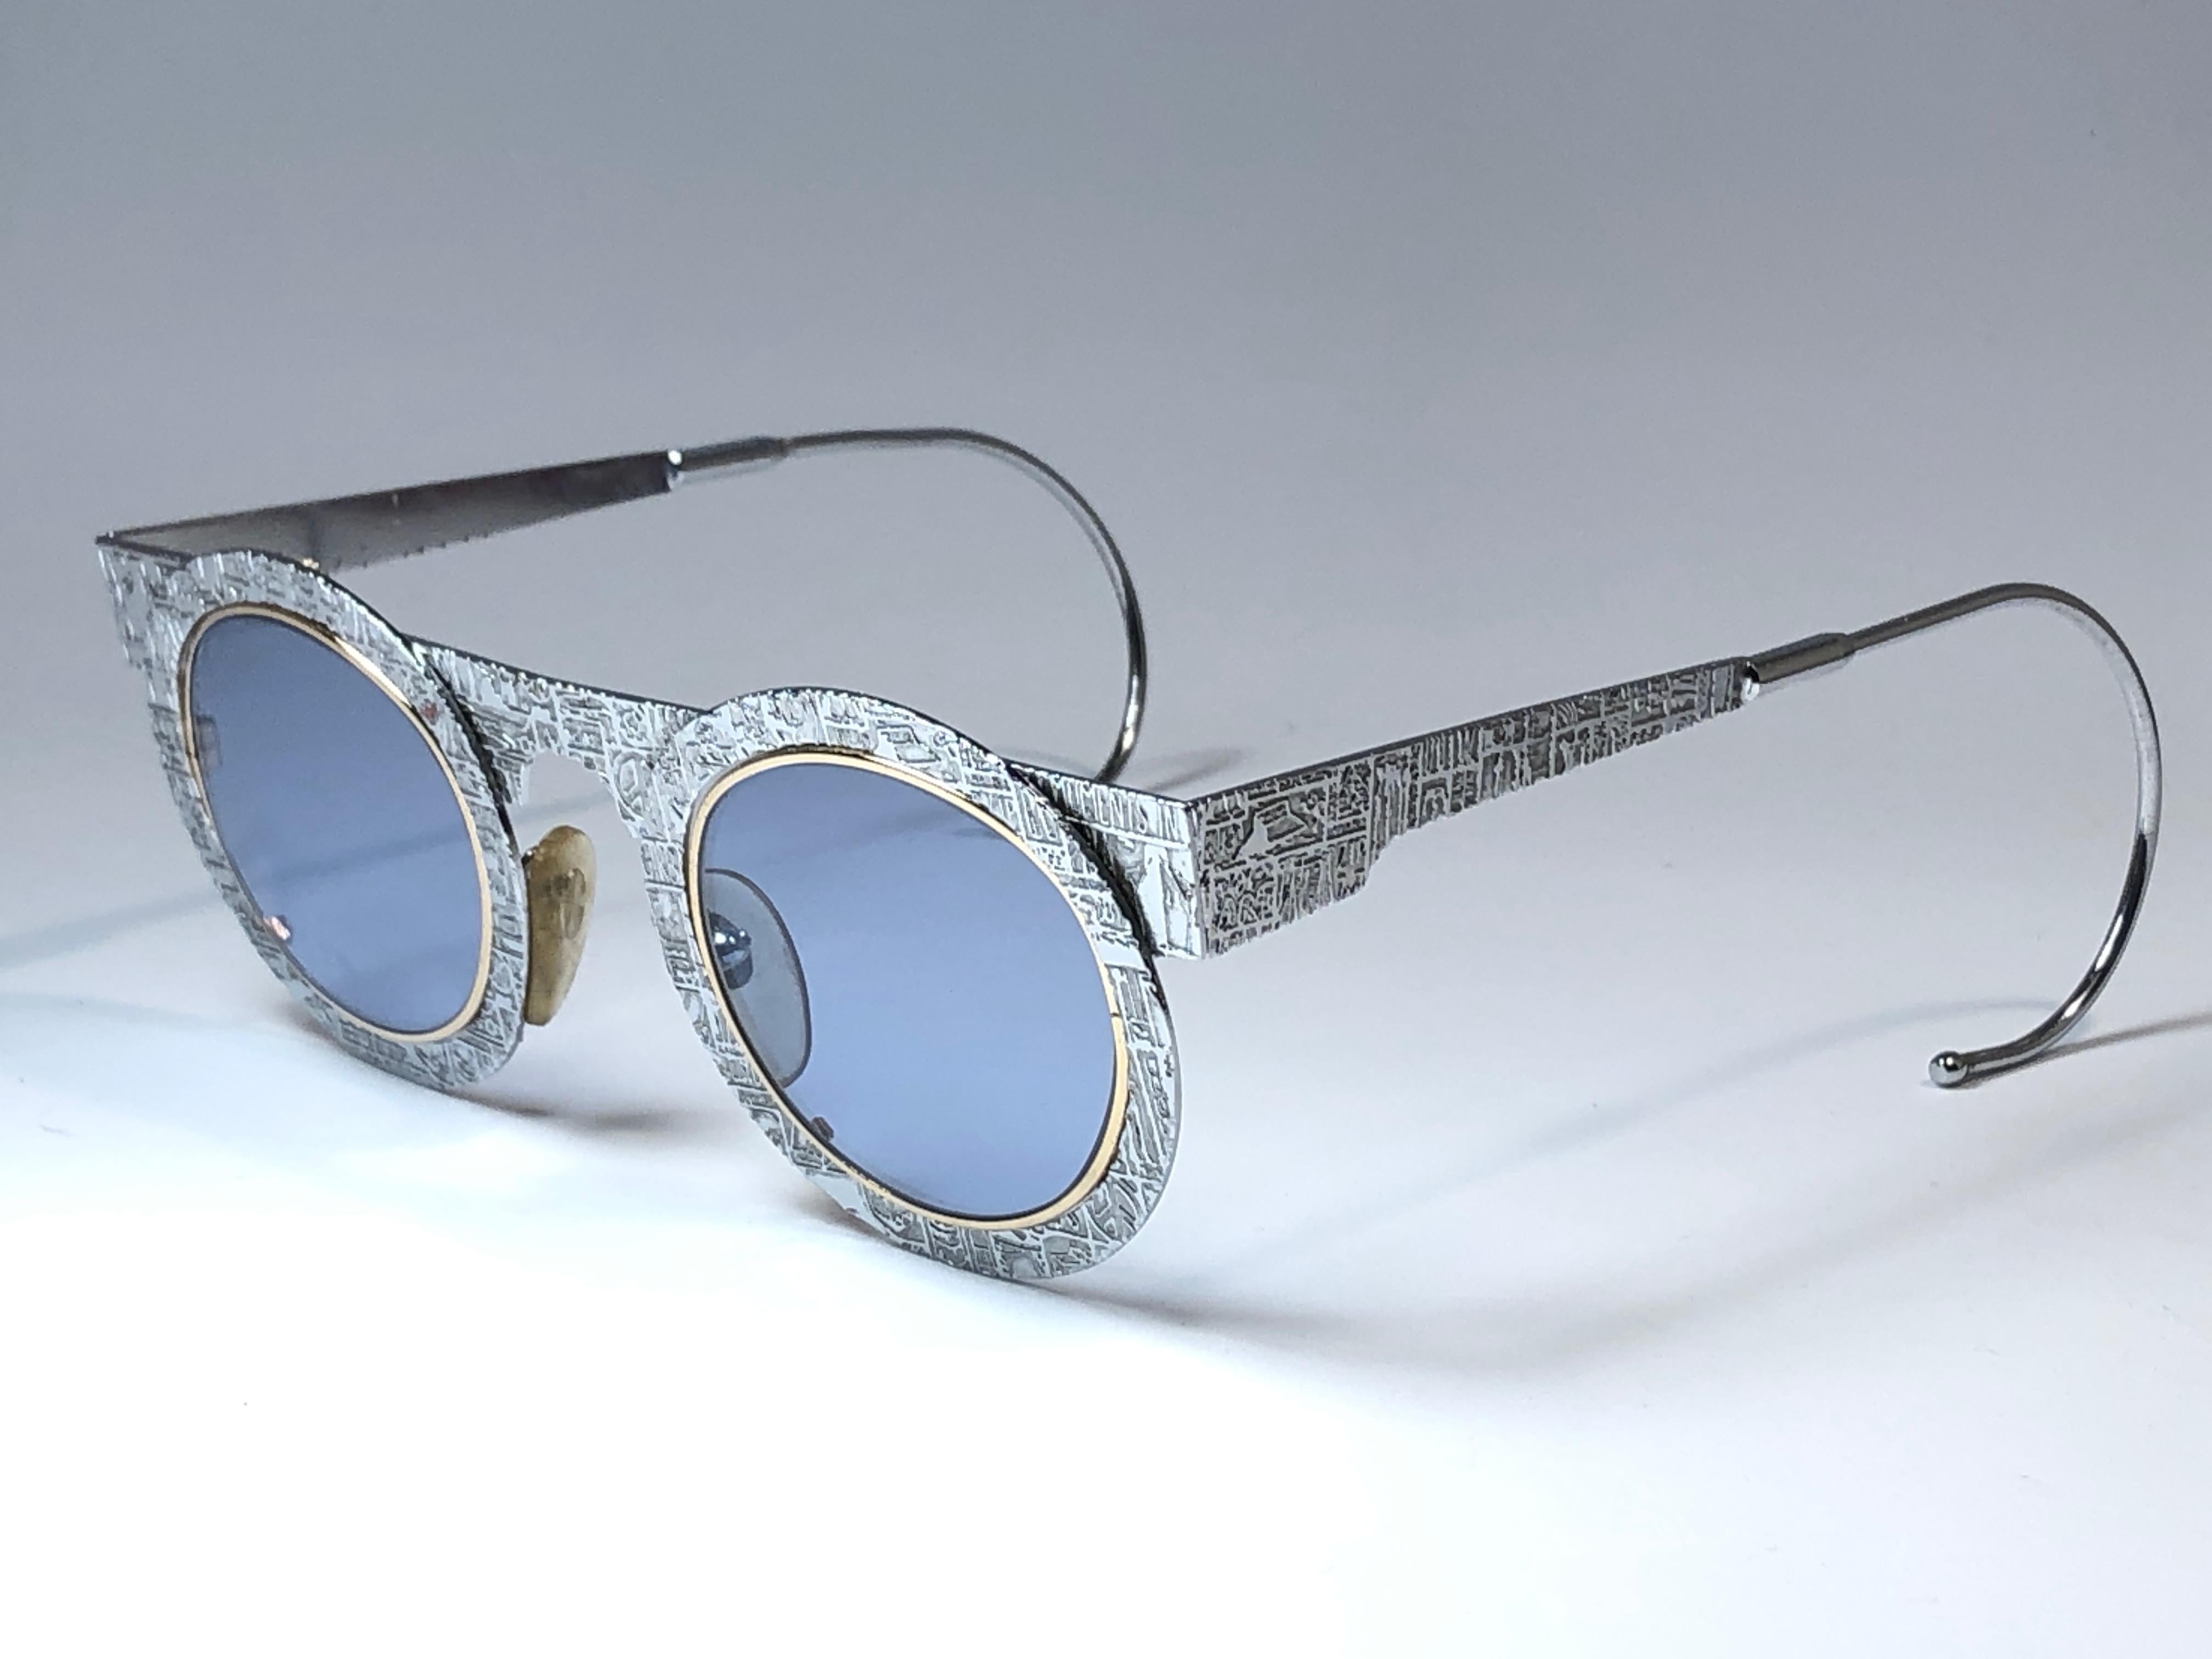 

IDC Pour Marithe Francois Girbaud round silver with engraved accents sunglasses holding a spotless pair of Lligh lenses. Curled temples for a fashionable yet comfortable wear.

New, never worn or displayed. This pair could show minor sign of wear